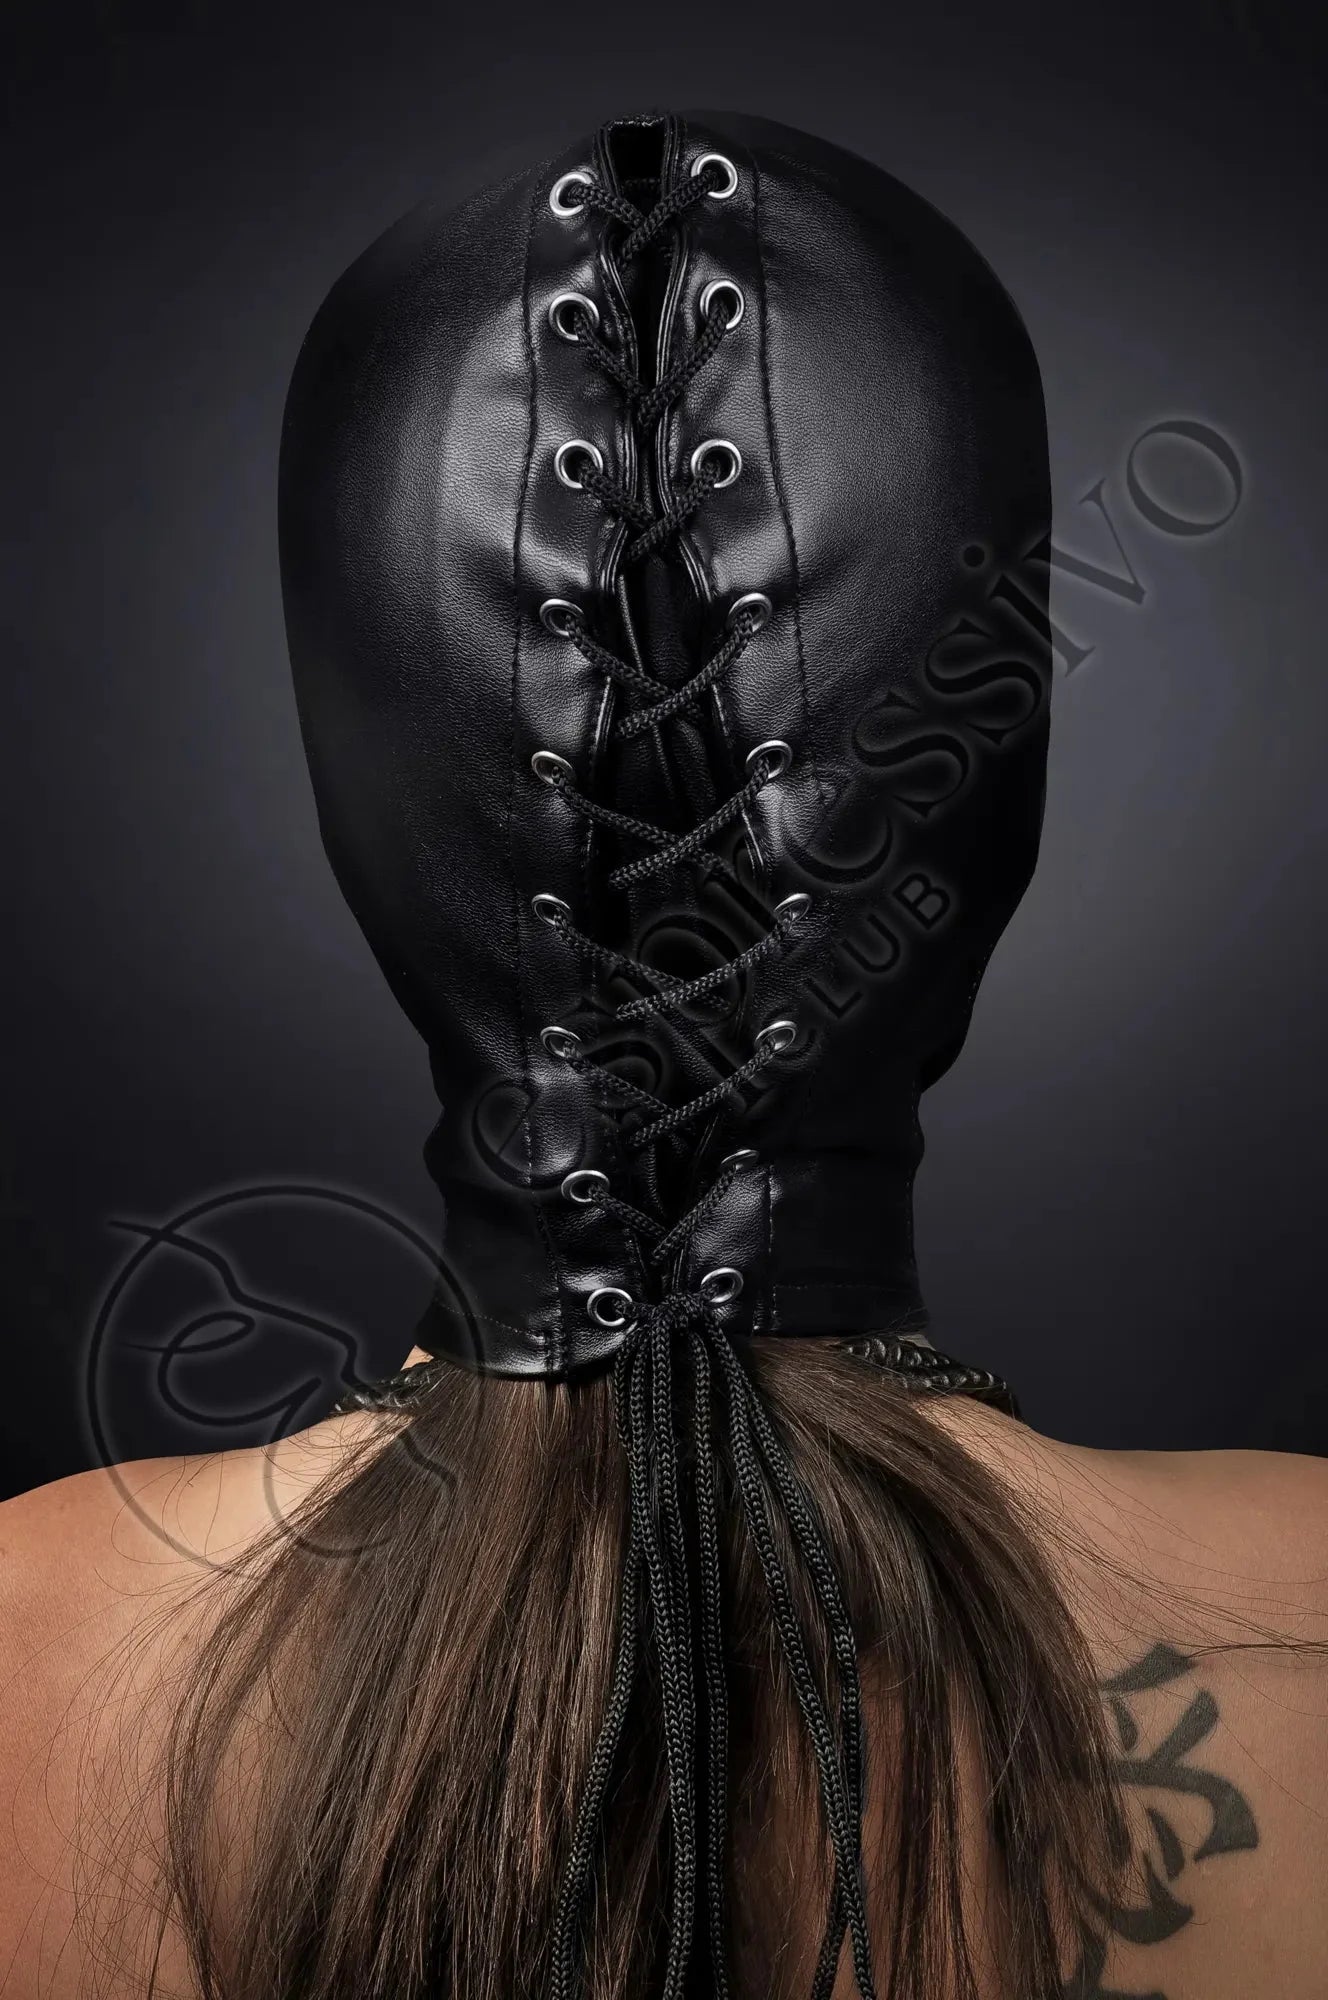 Tight Bondage Hood With Zippers For Sensory Deprivation Masks